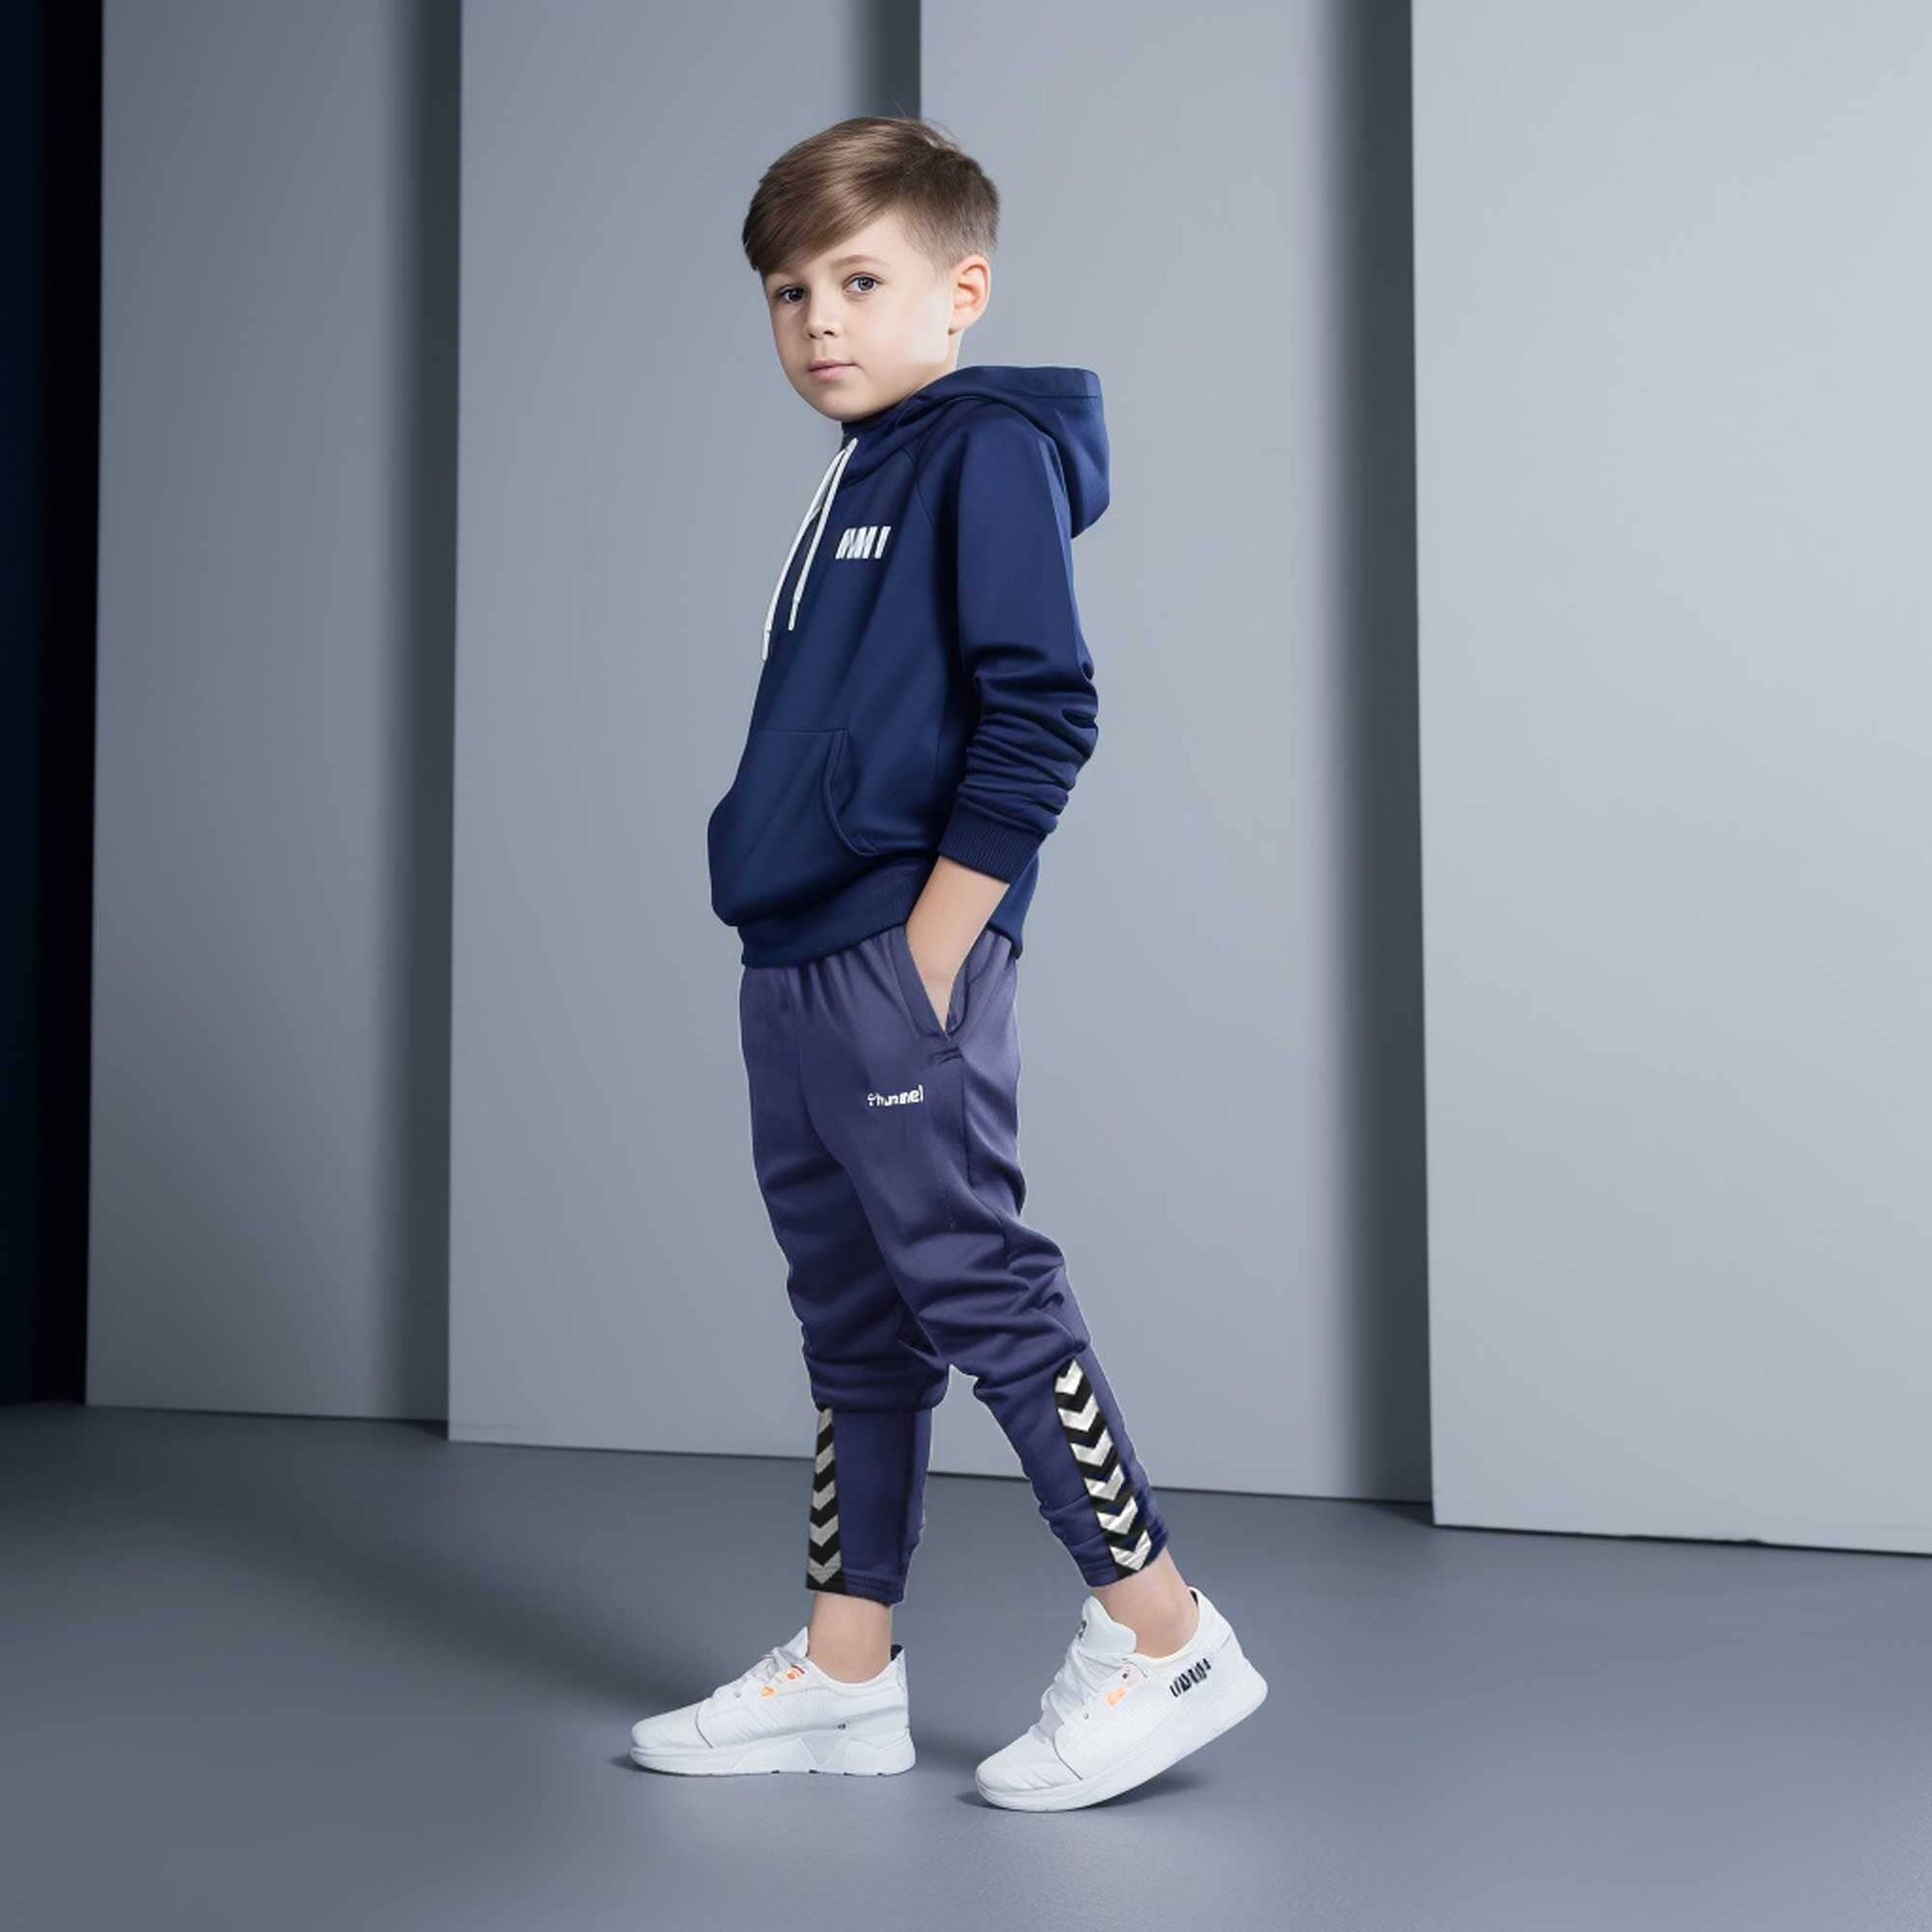 Hummel Boy's Premium Activewear Trousers Boy's Trousers HAS Apparel Navy 4 Years 